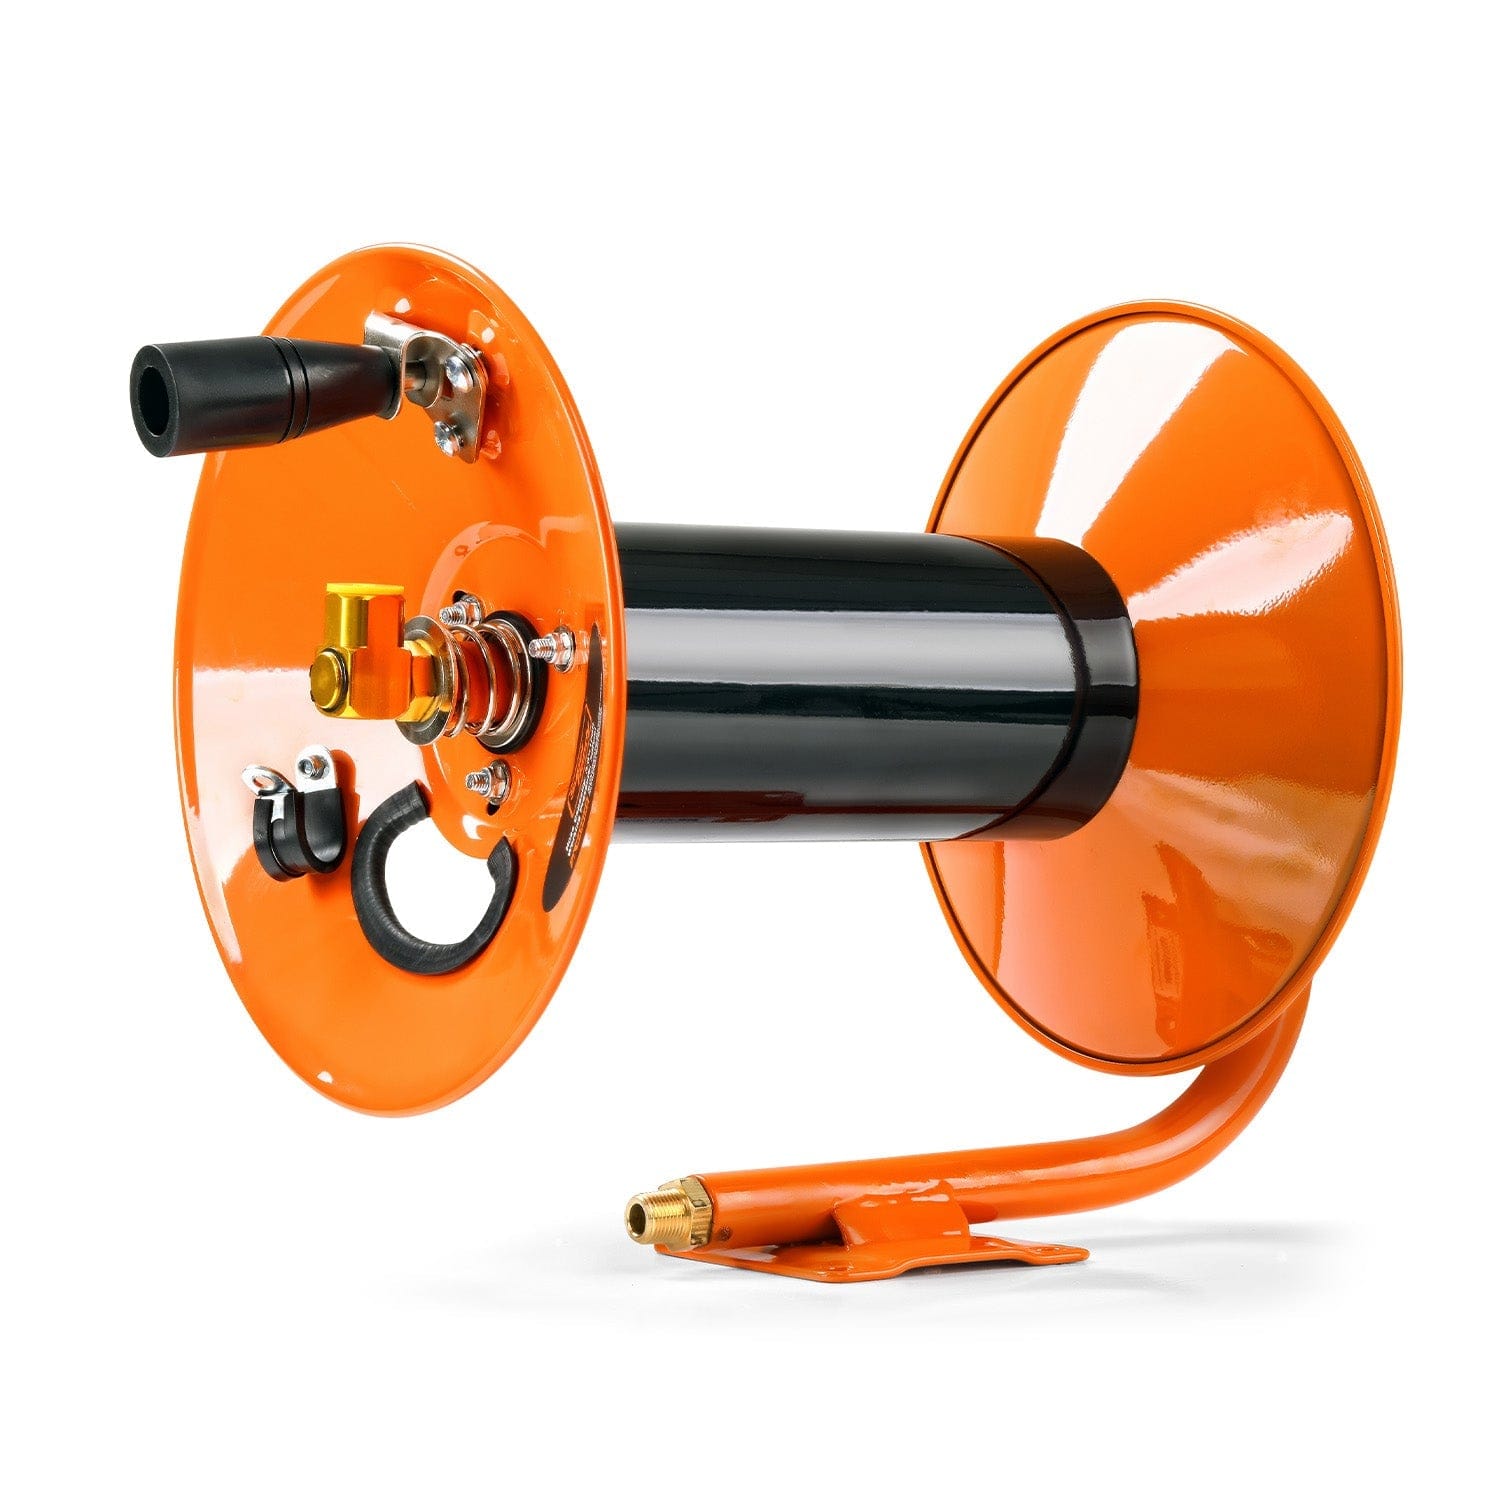 Air Hose Reel - Supports up to 3/8 Inch x 100' Feet Hose (Reel